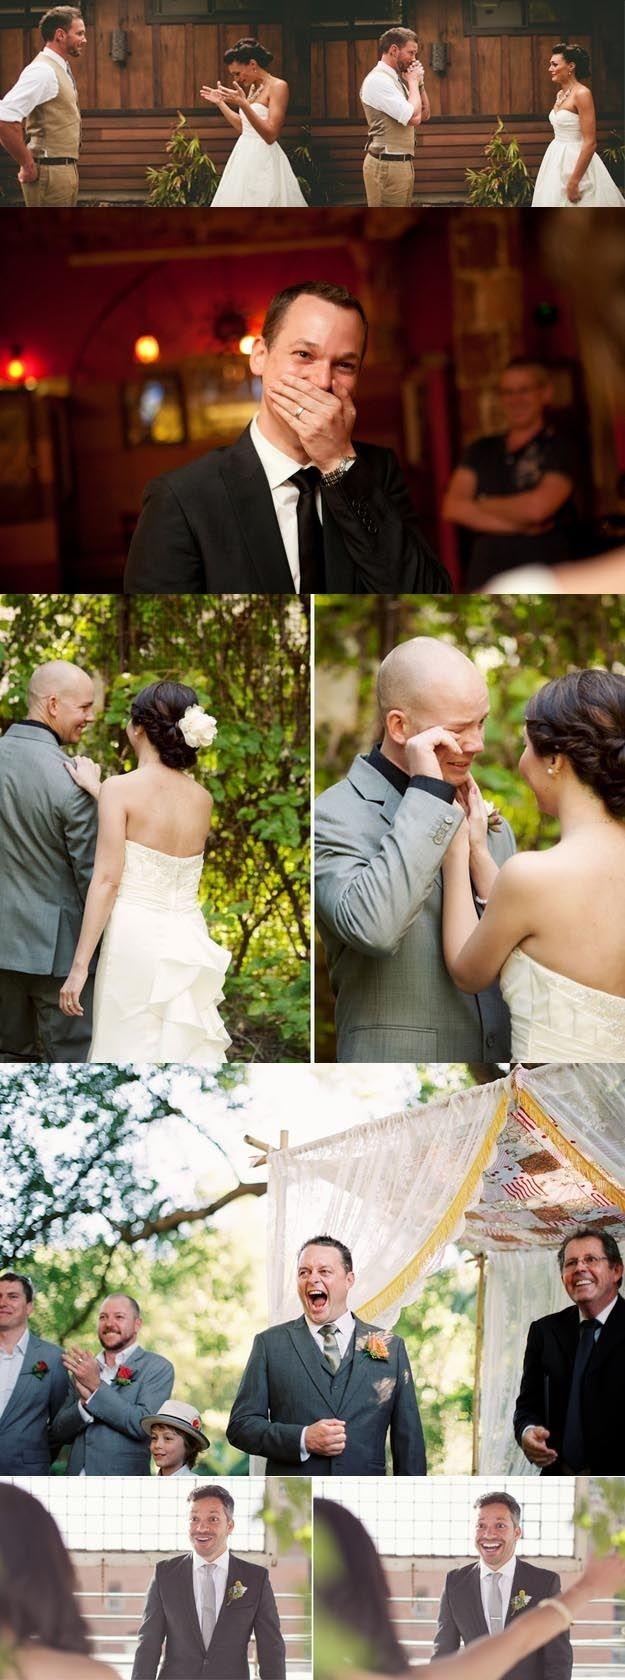 Wedding - The 50 Most Romantic Things That Ever Happened